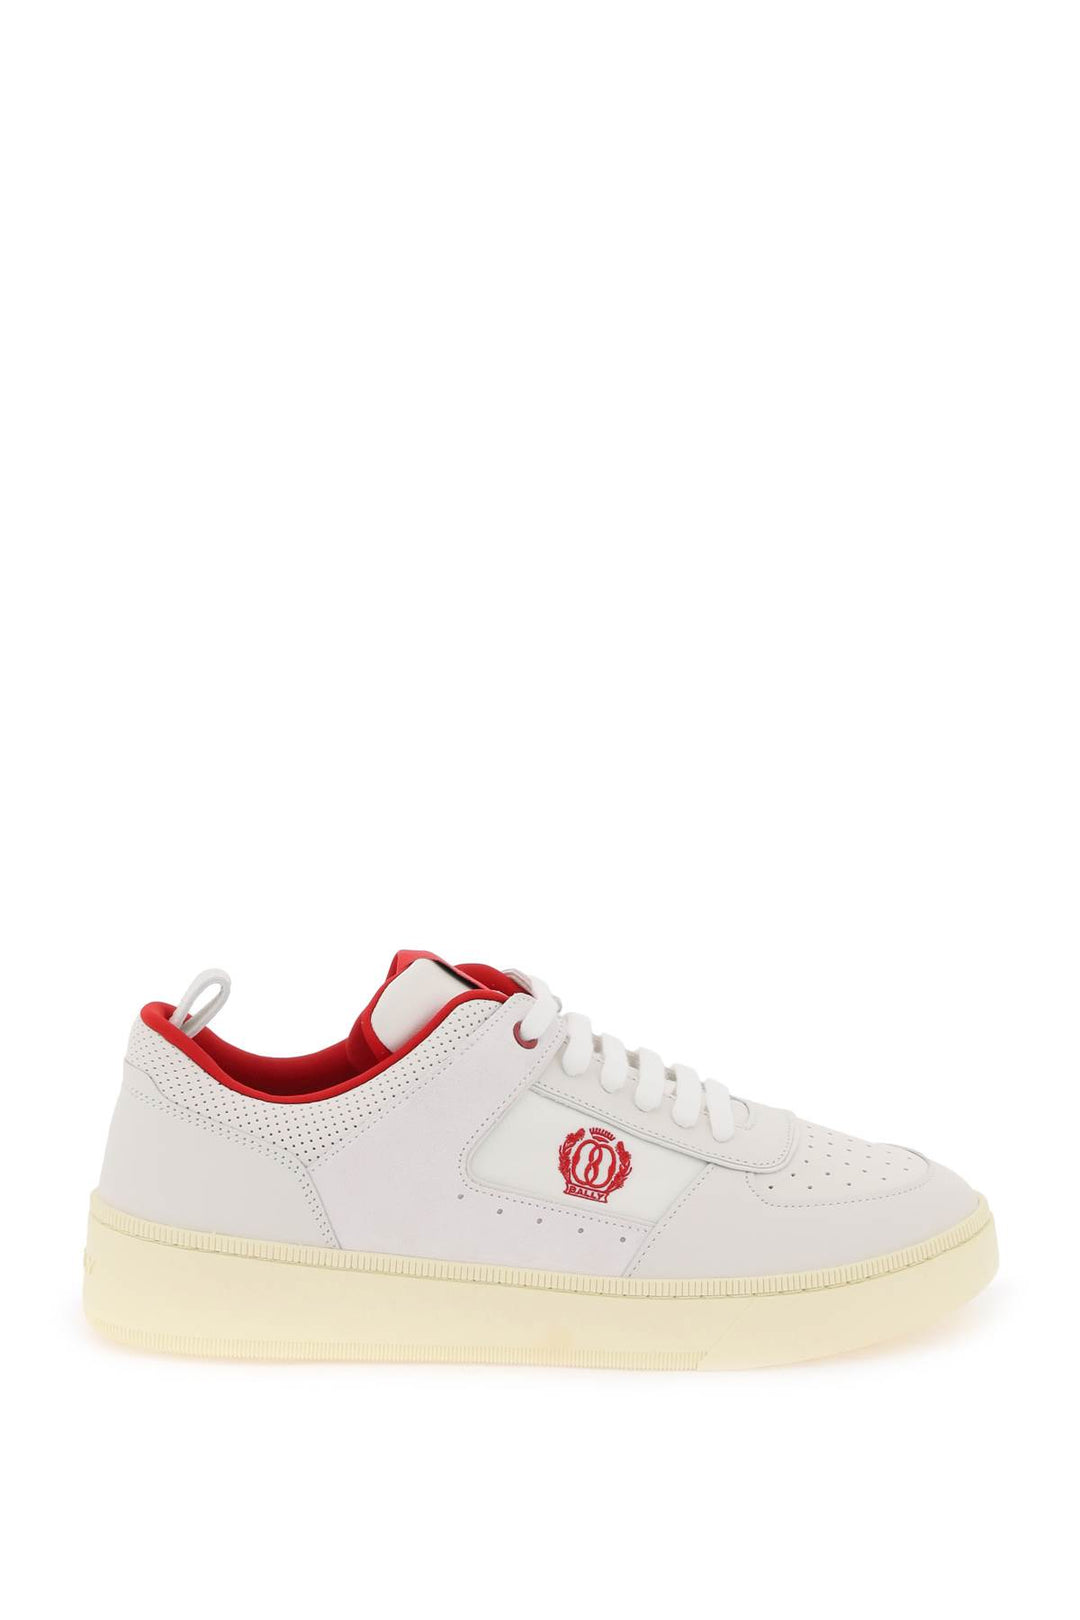 Bally Leather Riweira Sneakers   Bianco